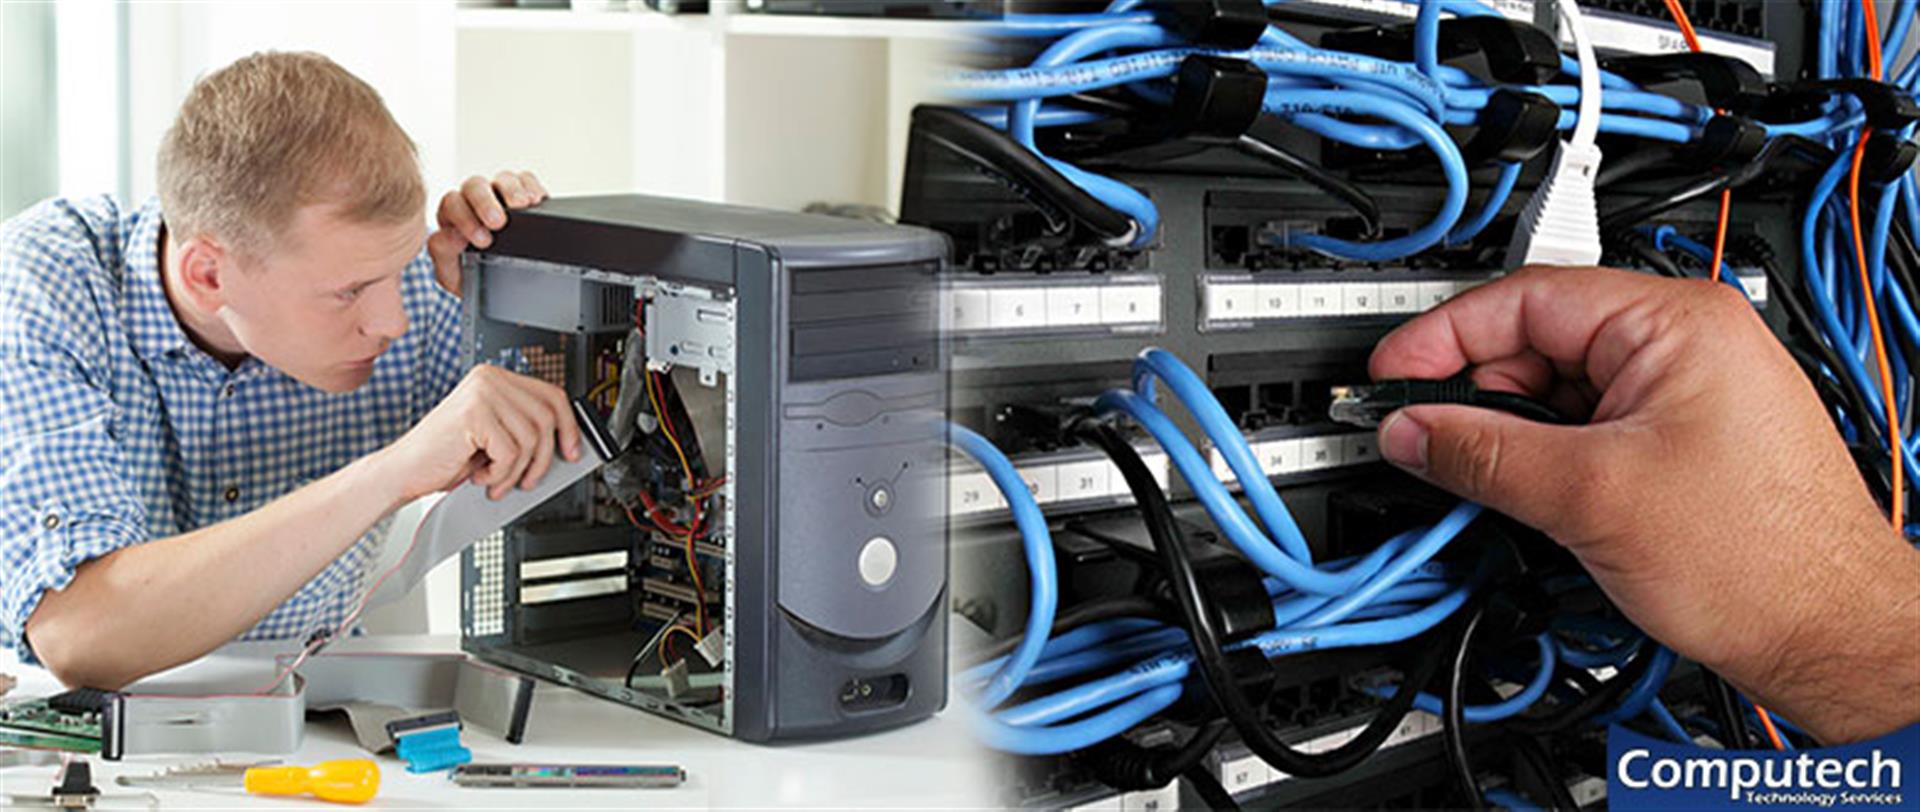 Monroeville Alabama Onsite PC & Printer Repair, Networking, Voice & Data Inside Wiring Services